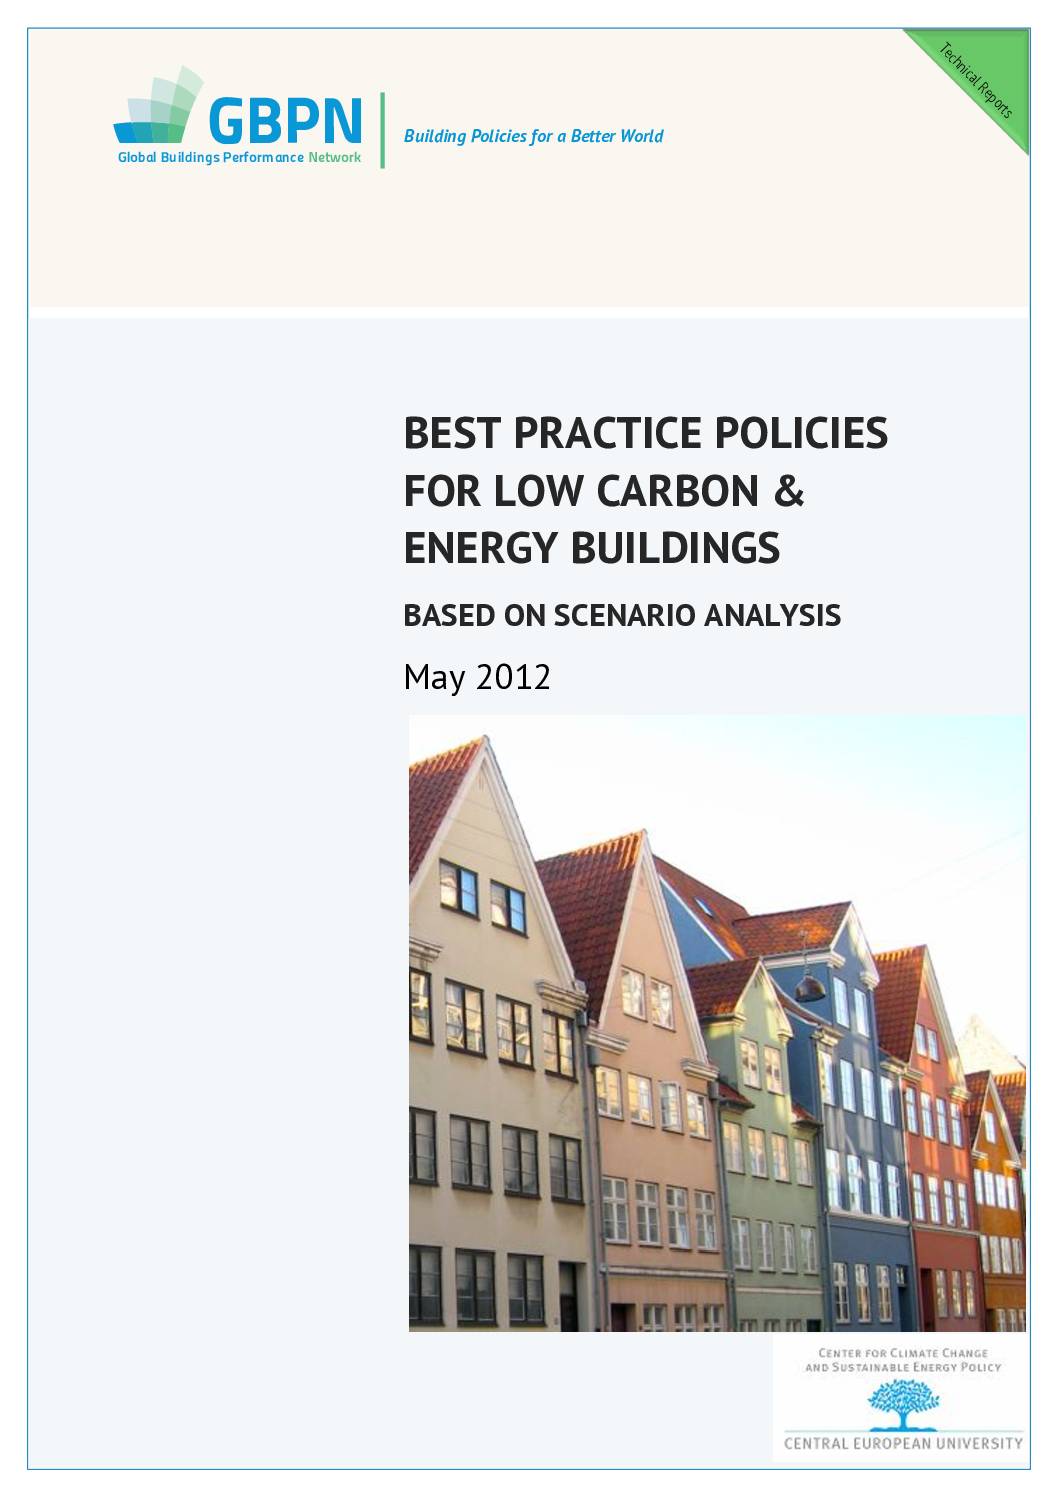 Best Practice Policies for Low Carbon & Energy Buildings Based on Scenario Analysis